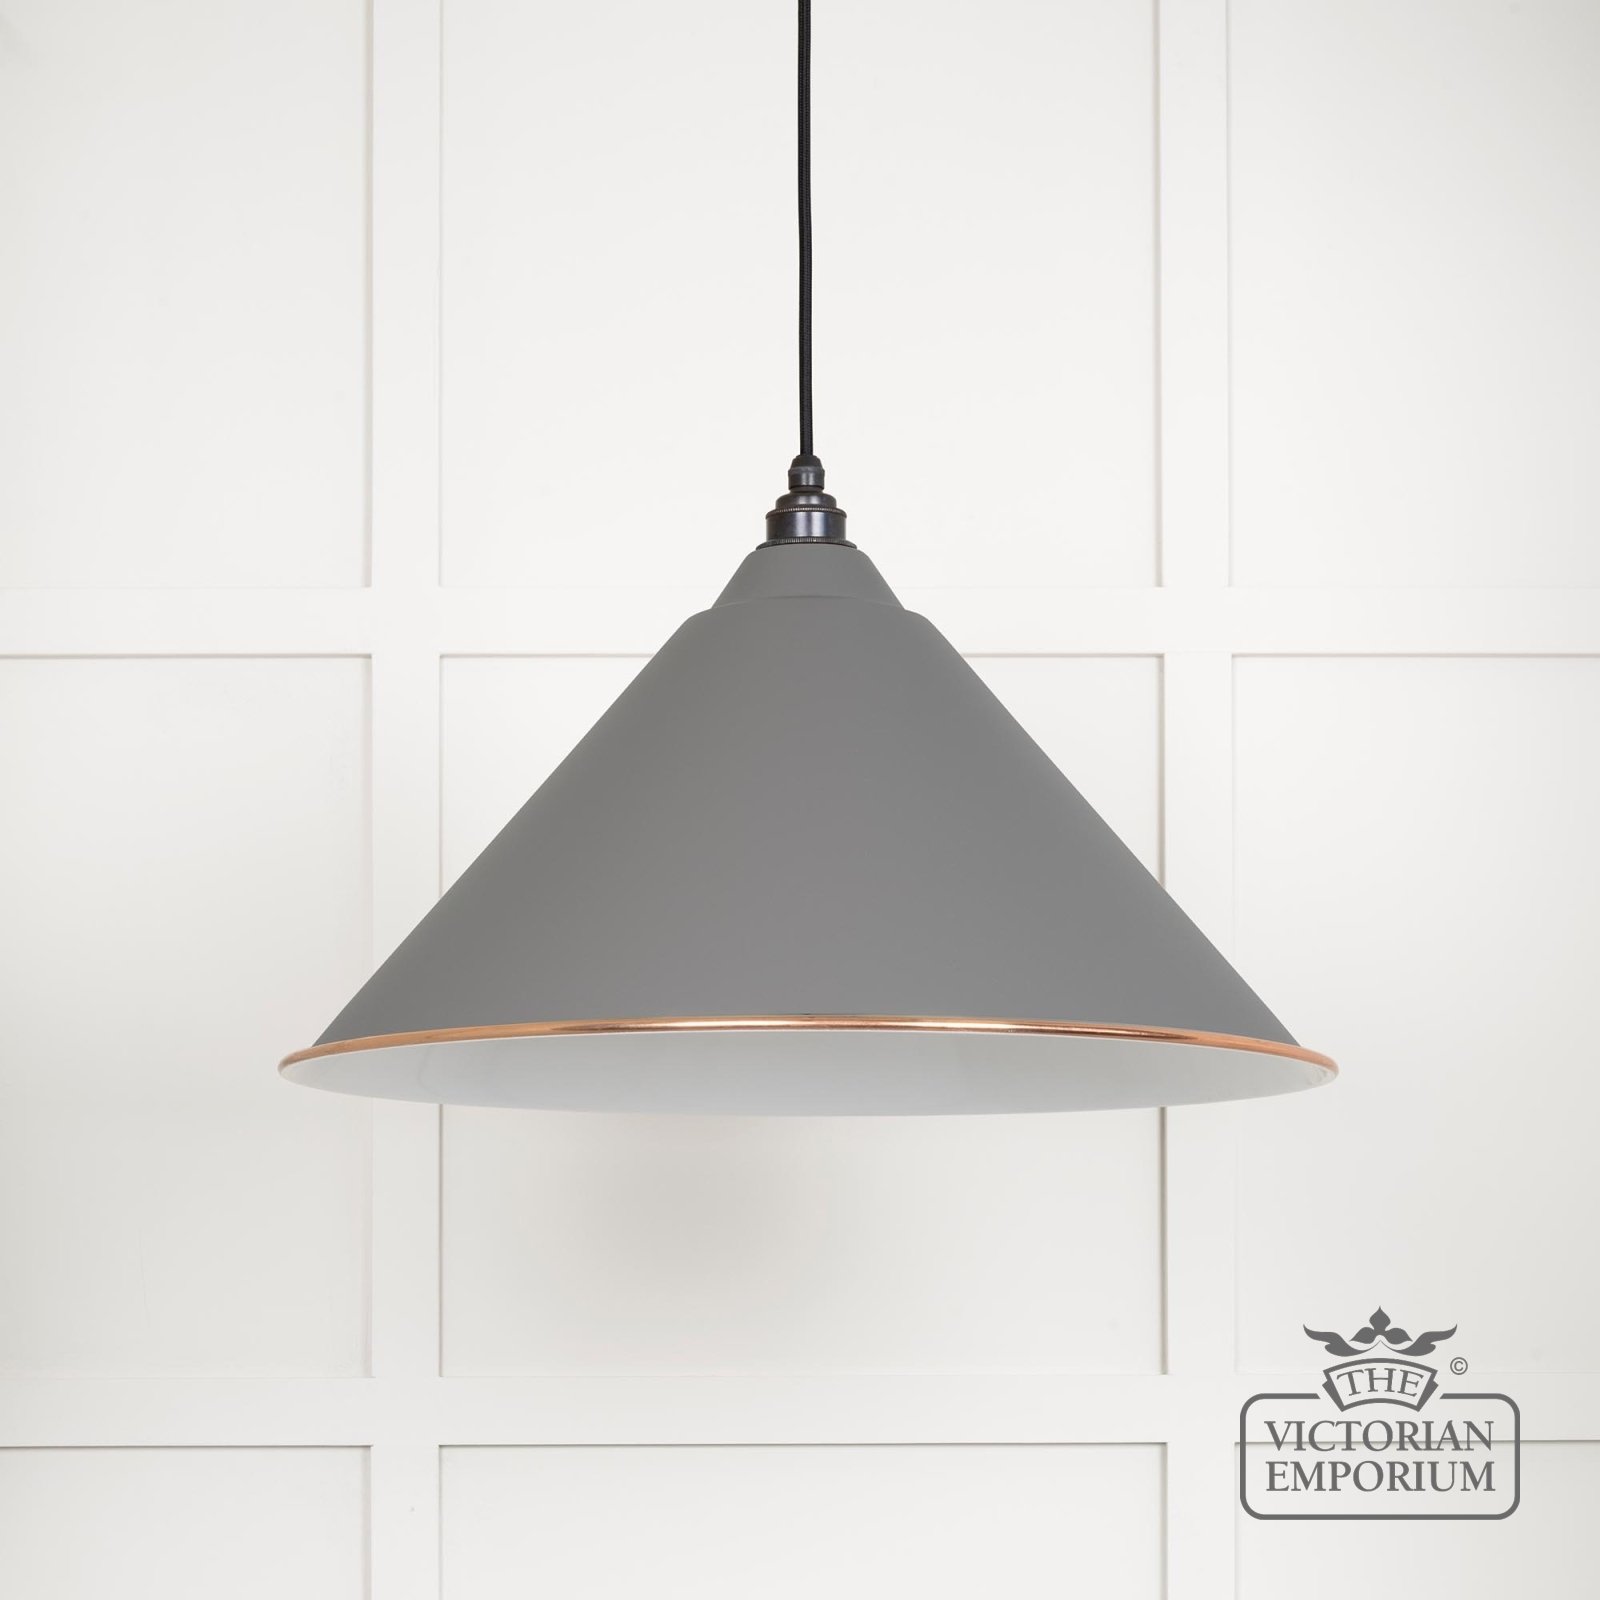 Hockliffe pendant light in Bluff and White gloss interior